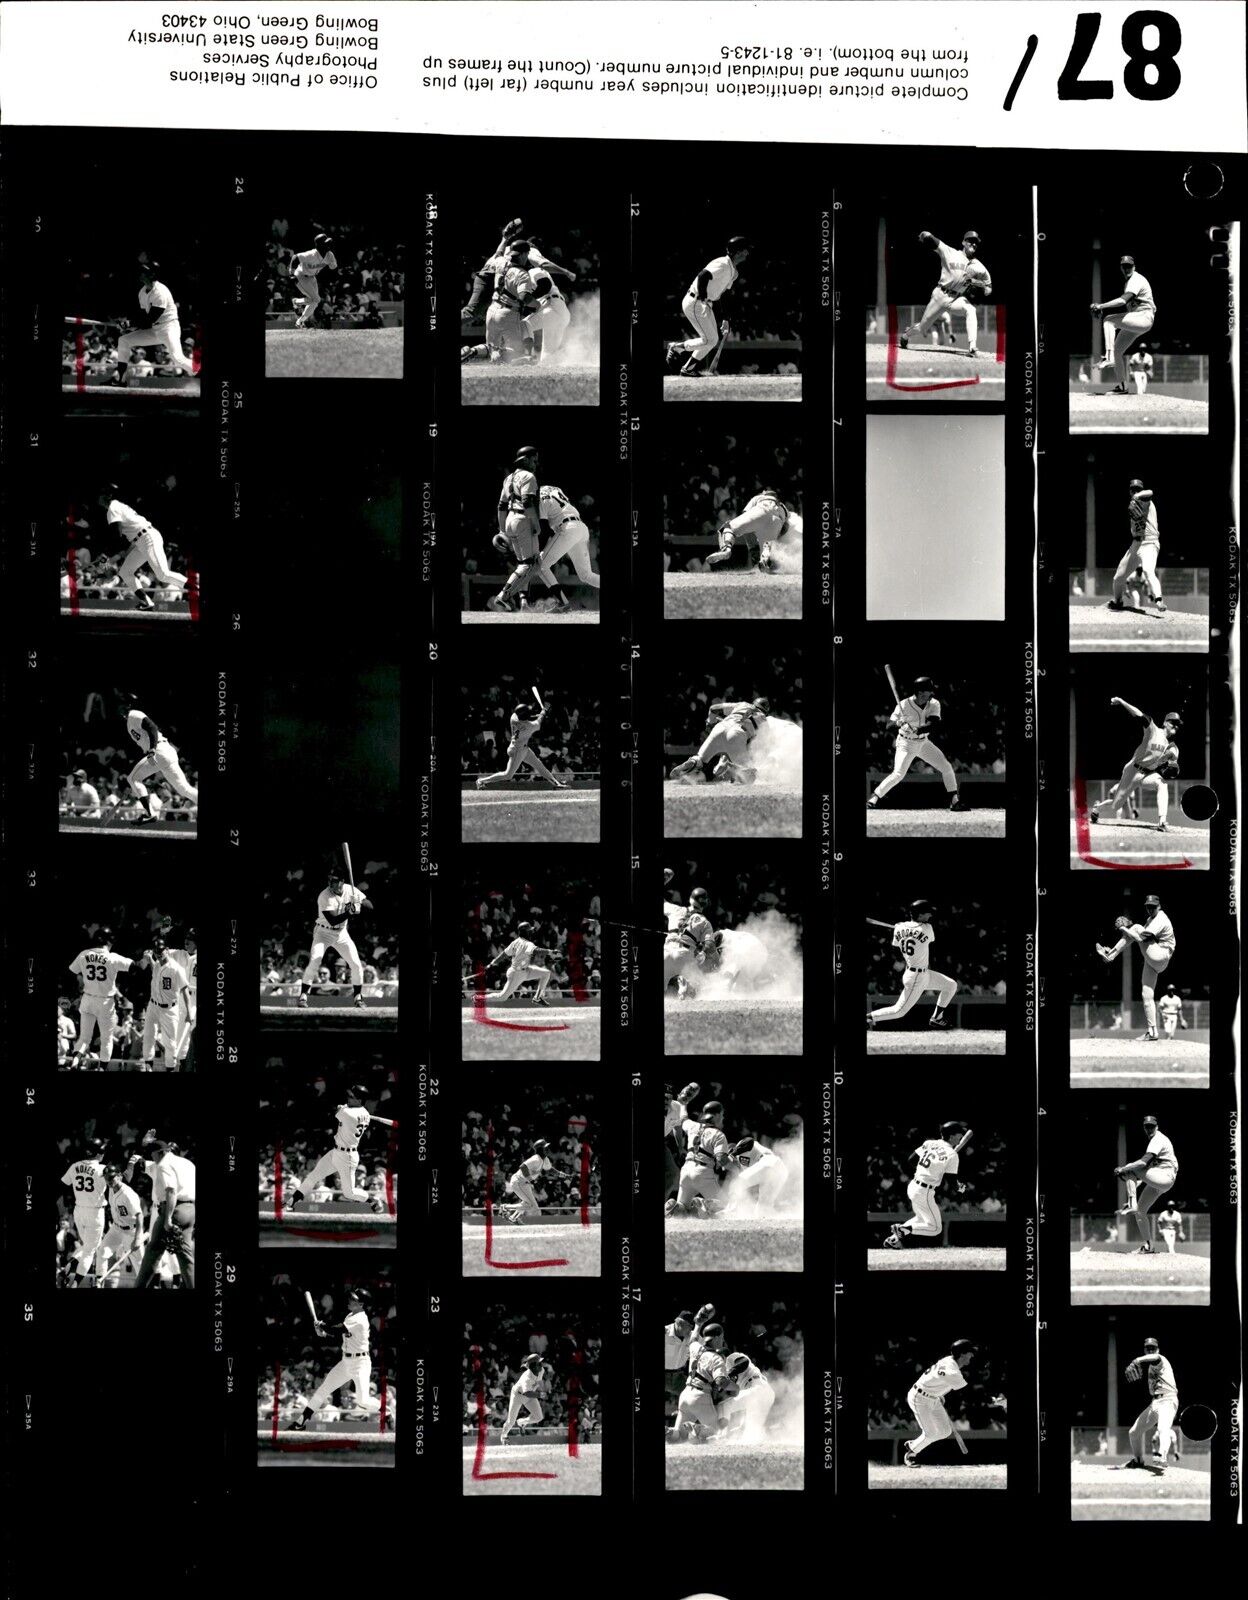 LD323 1988 Orig Contact Sheet Photo MICKEY BRANTLEY MIKE MOORE MARINERS - TIGERS